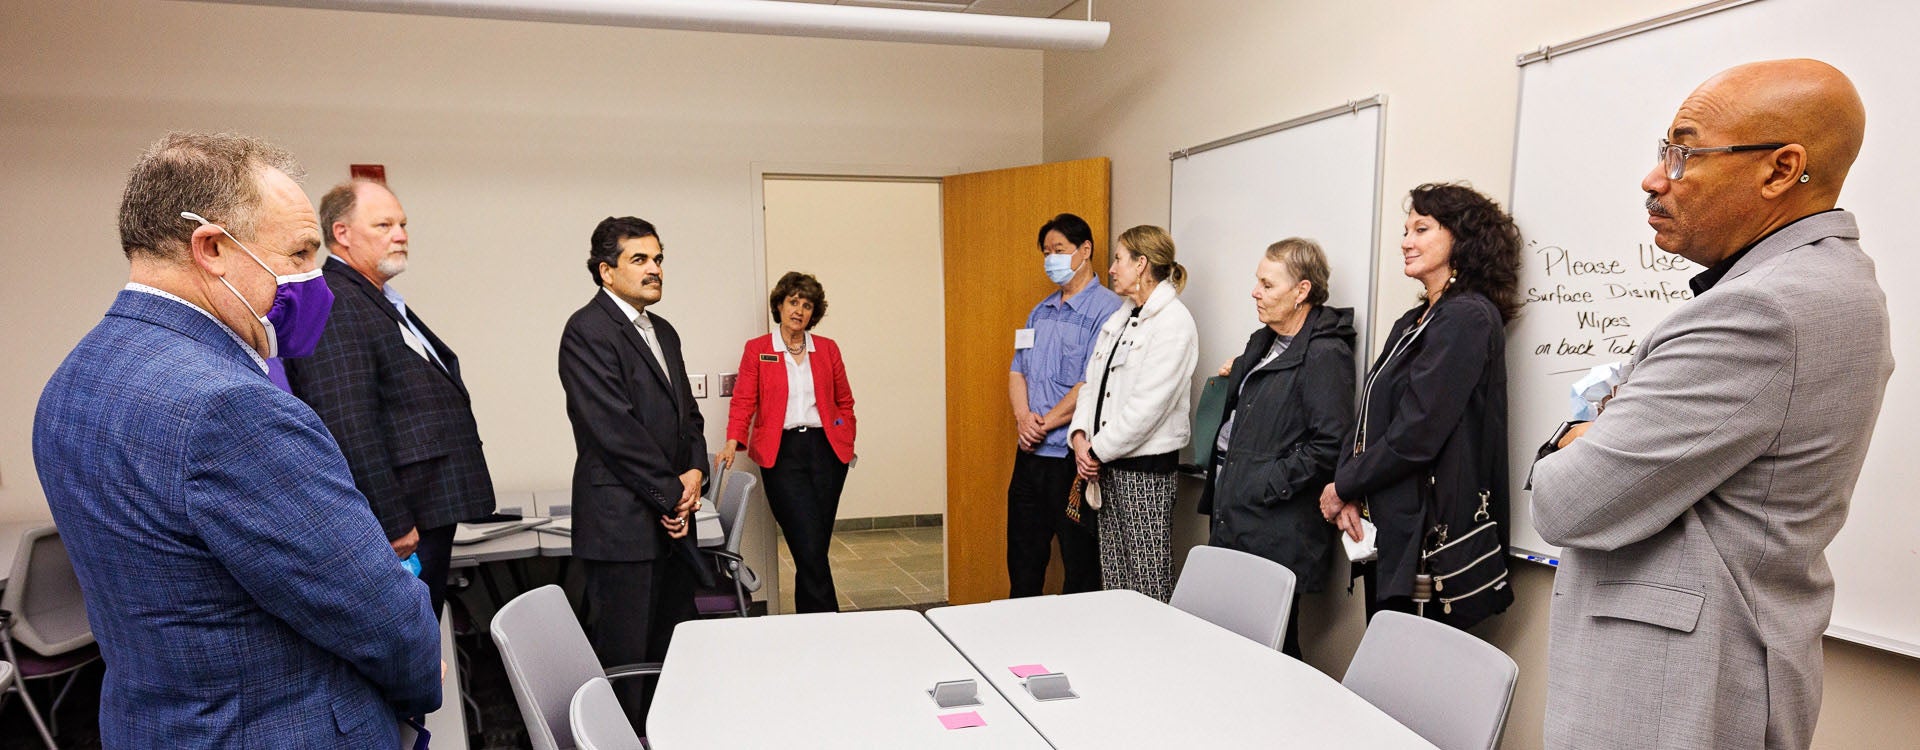 Deans from across the South tour ECU's College of Allied Health Sciences.